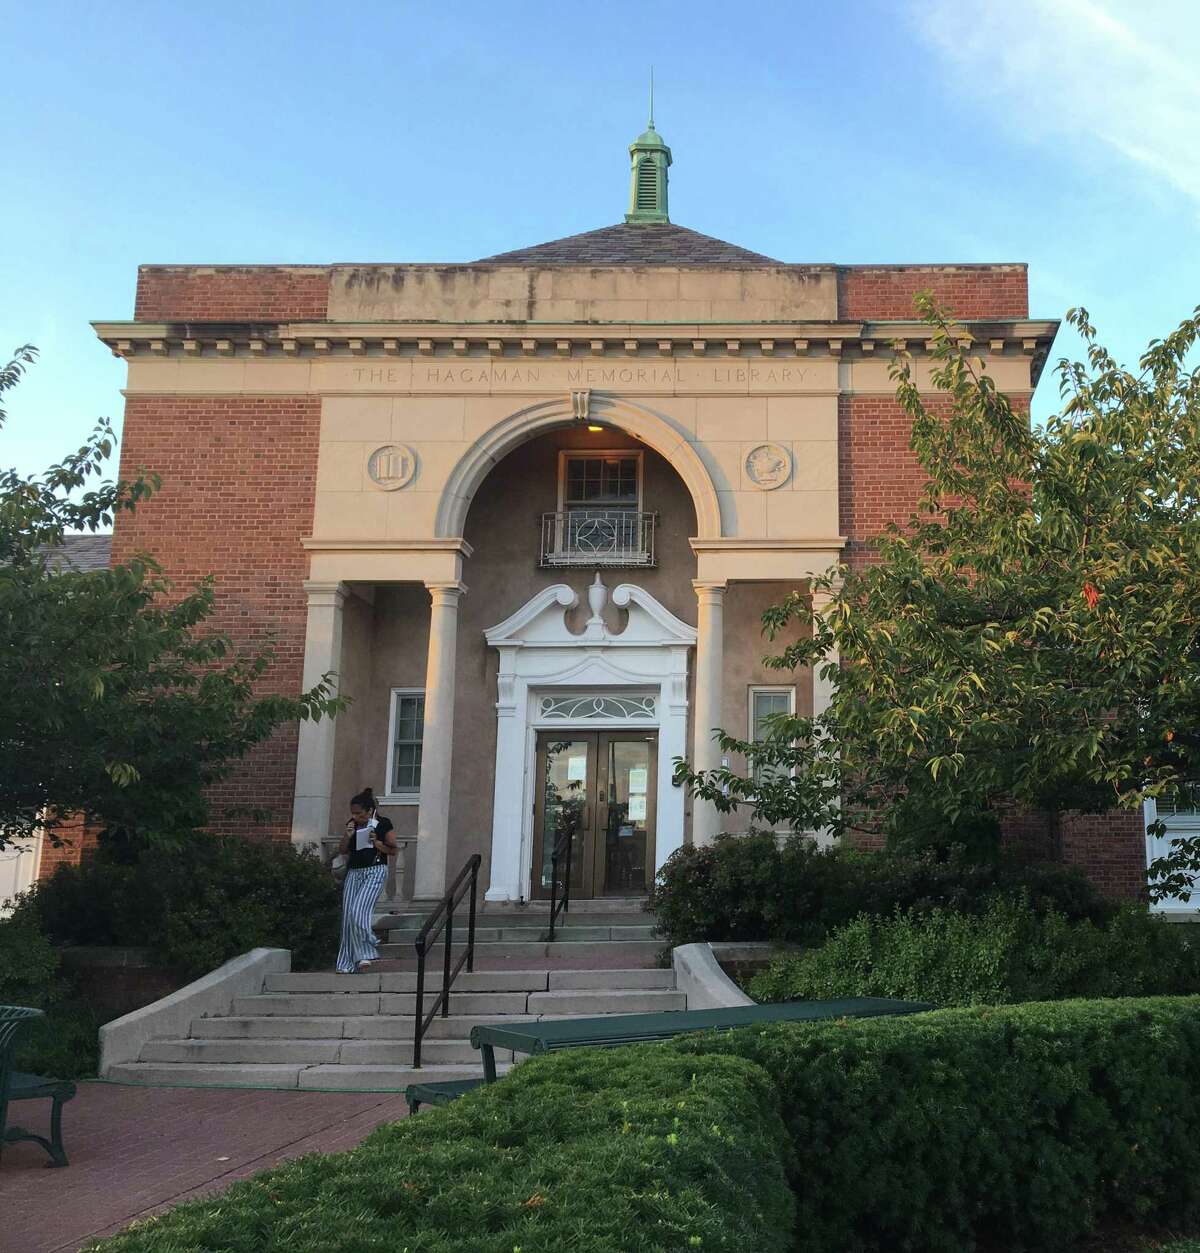 The Hagaman Memorial Library in East Haven